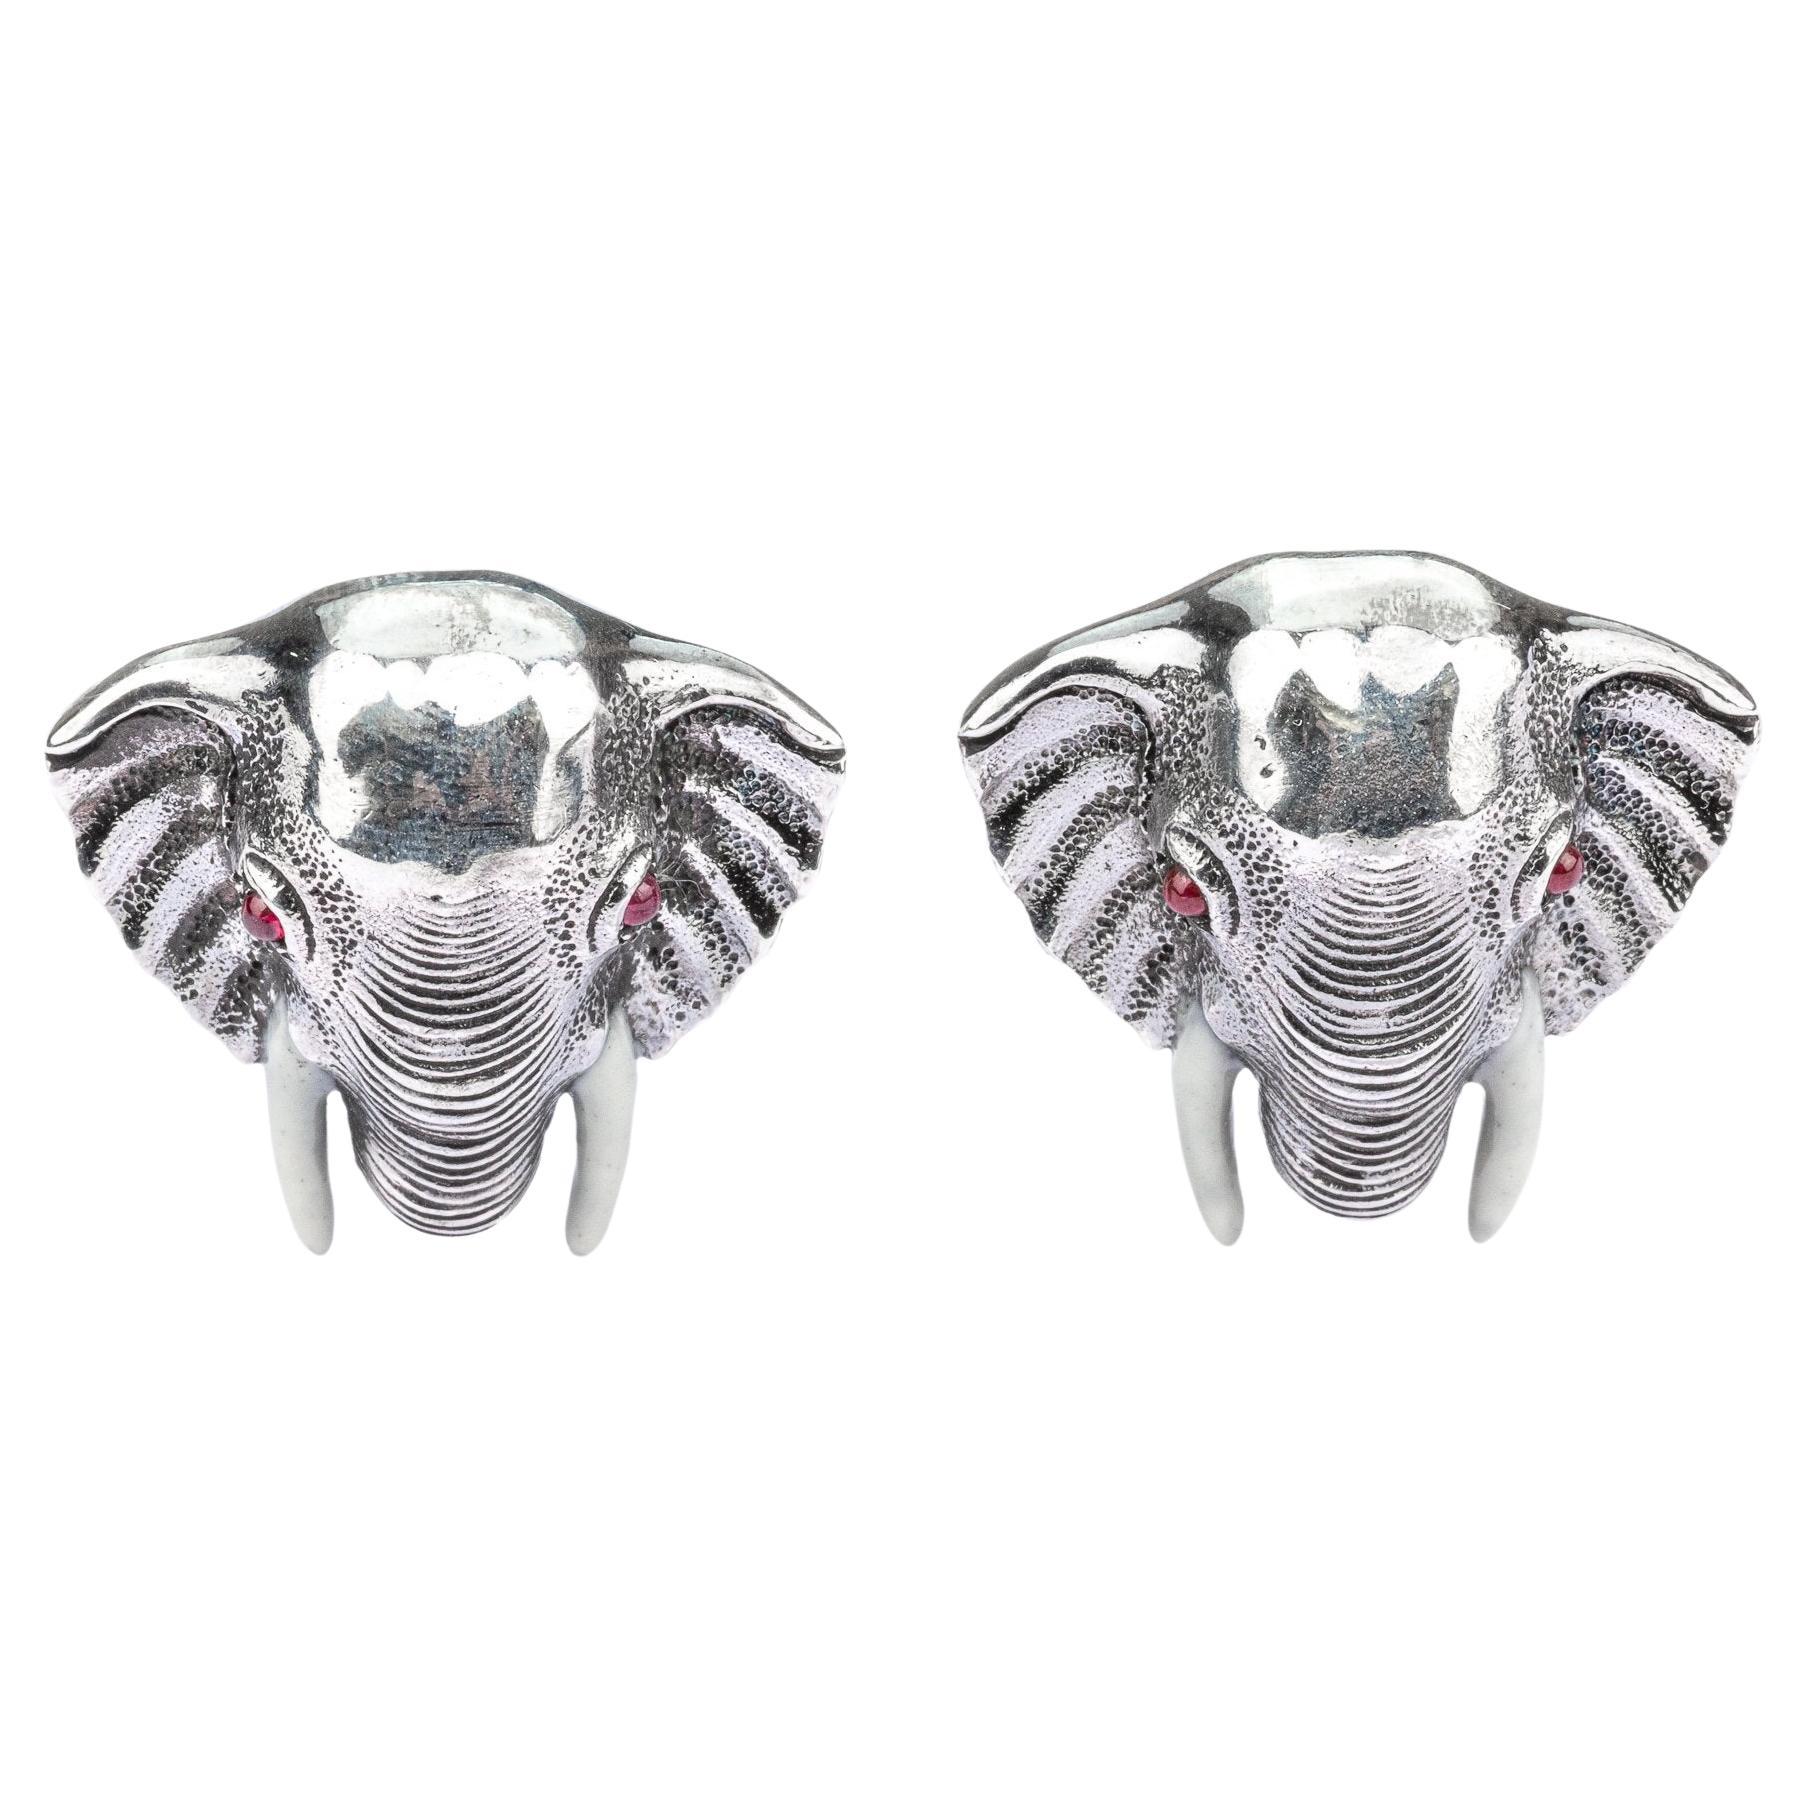 Tichu Ruby and Crystal Quartz Indian Elephant Face Cufflink in Sterling Silver For Sale